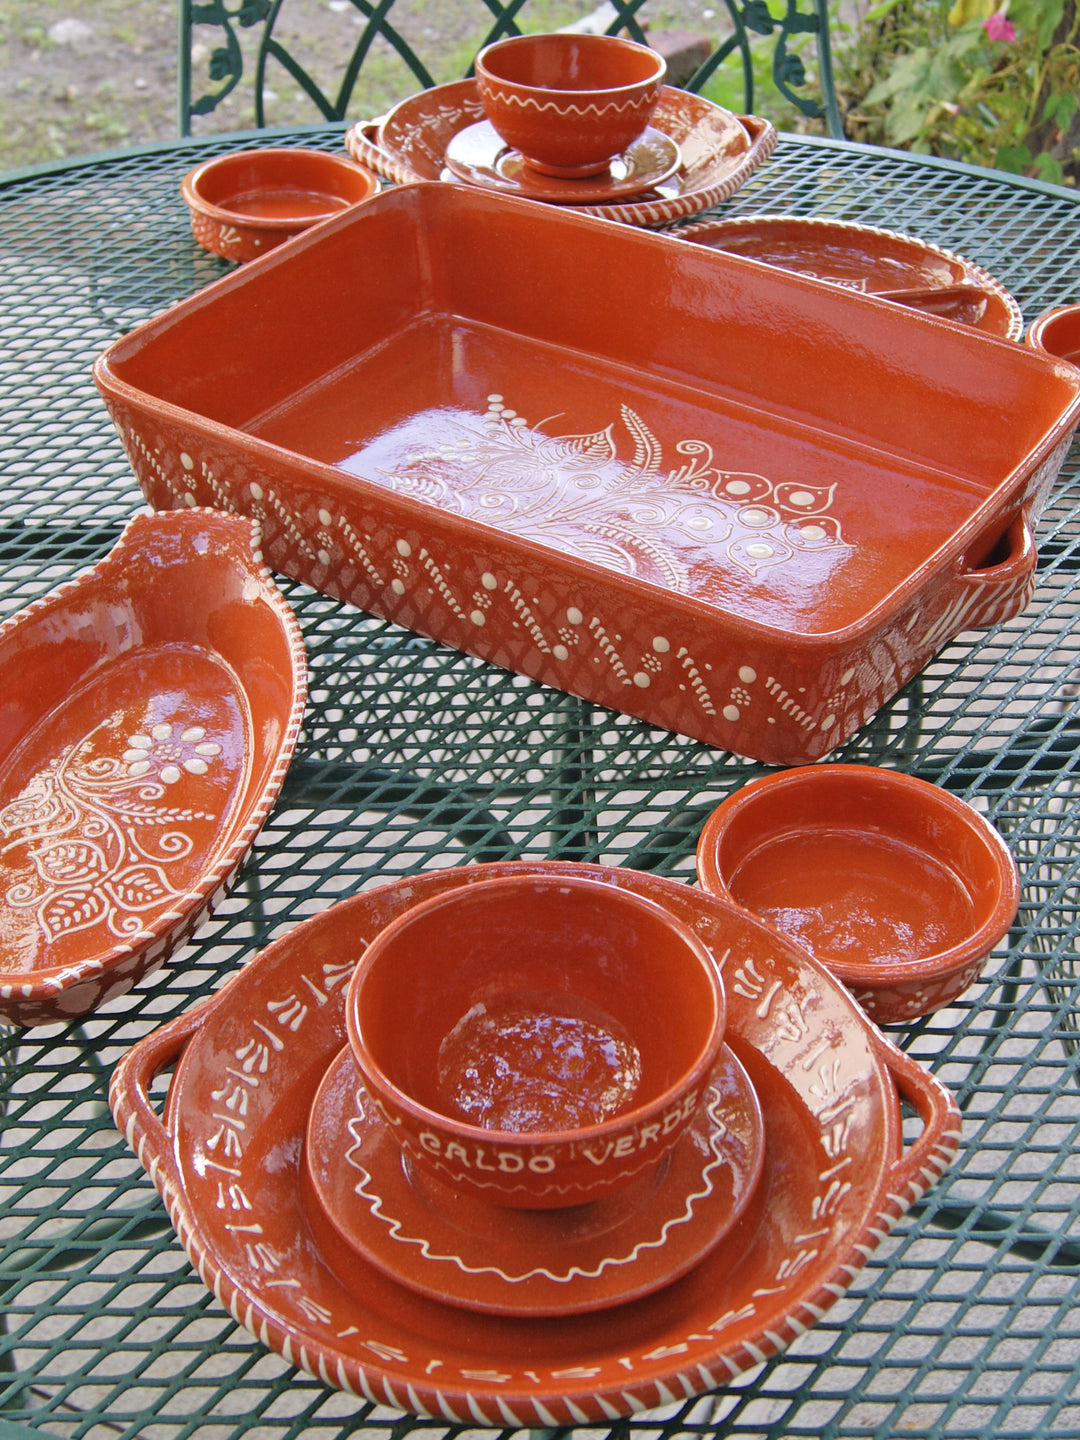 The Ceramic Cookware Set - Porcelain Kitchen Accessories Terracotta Red